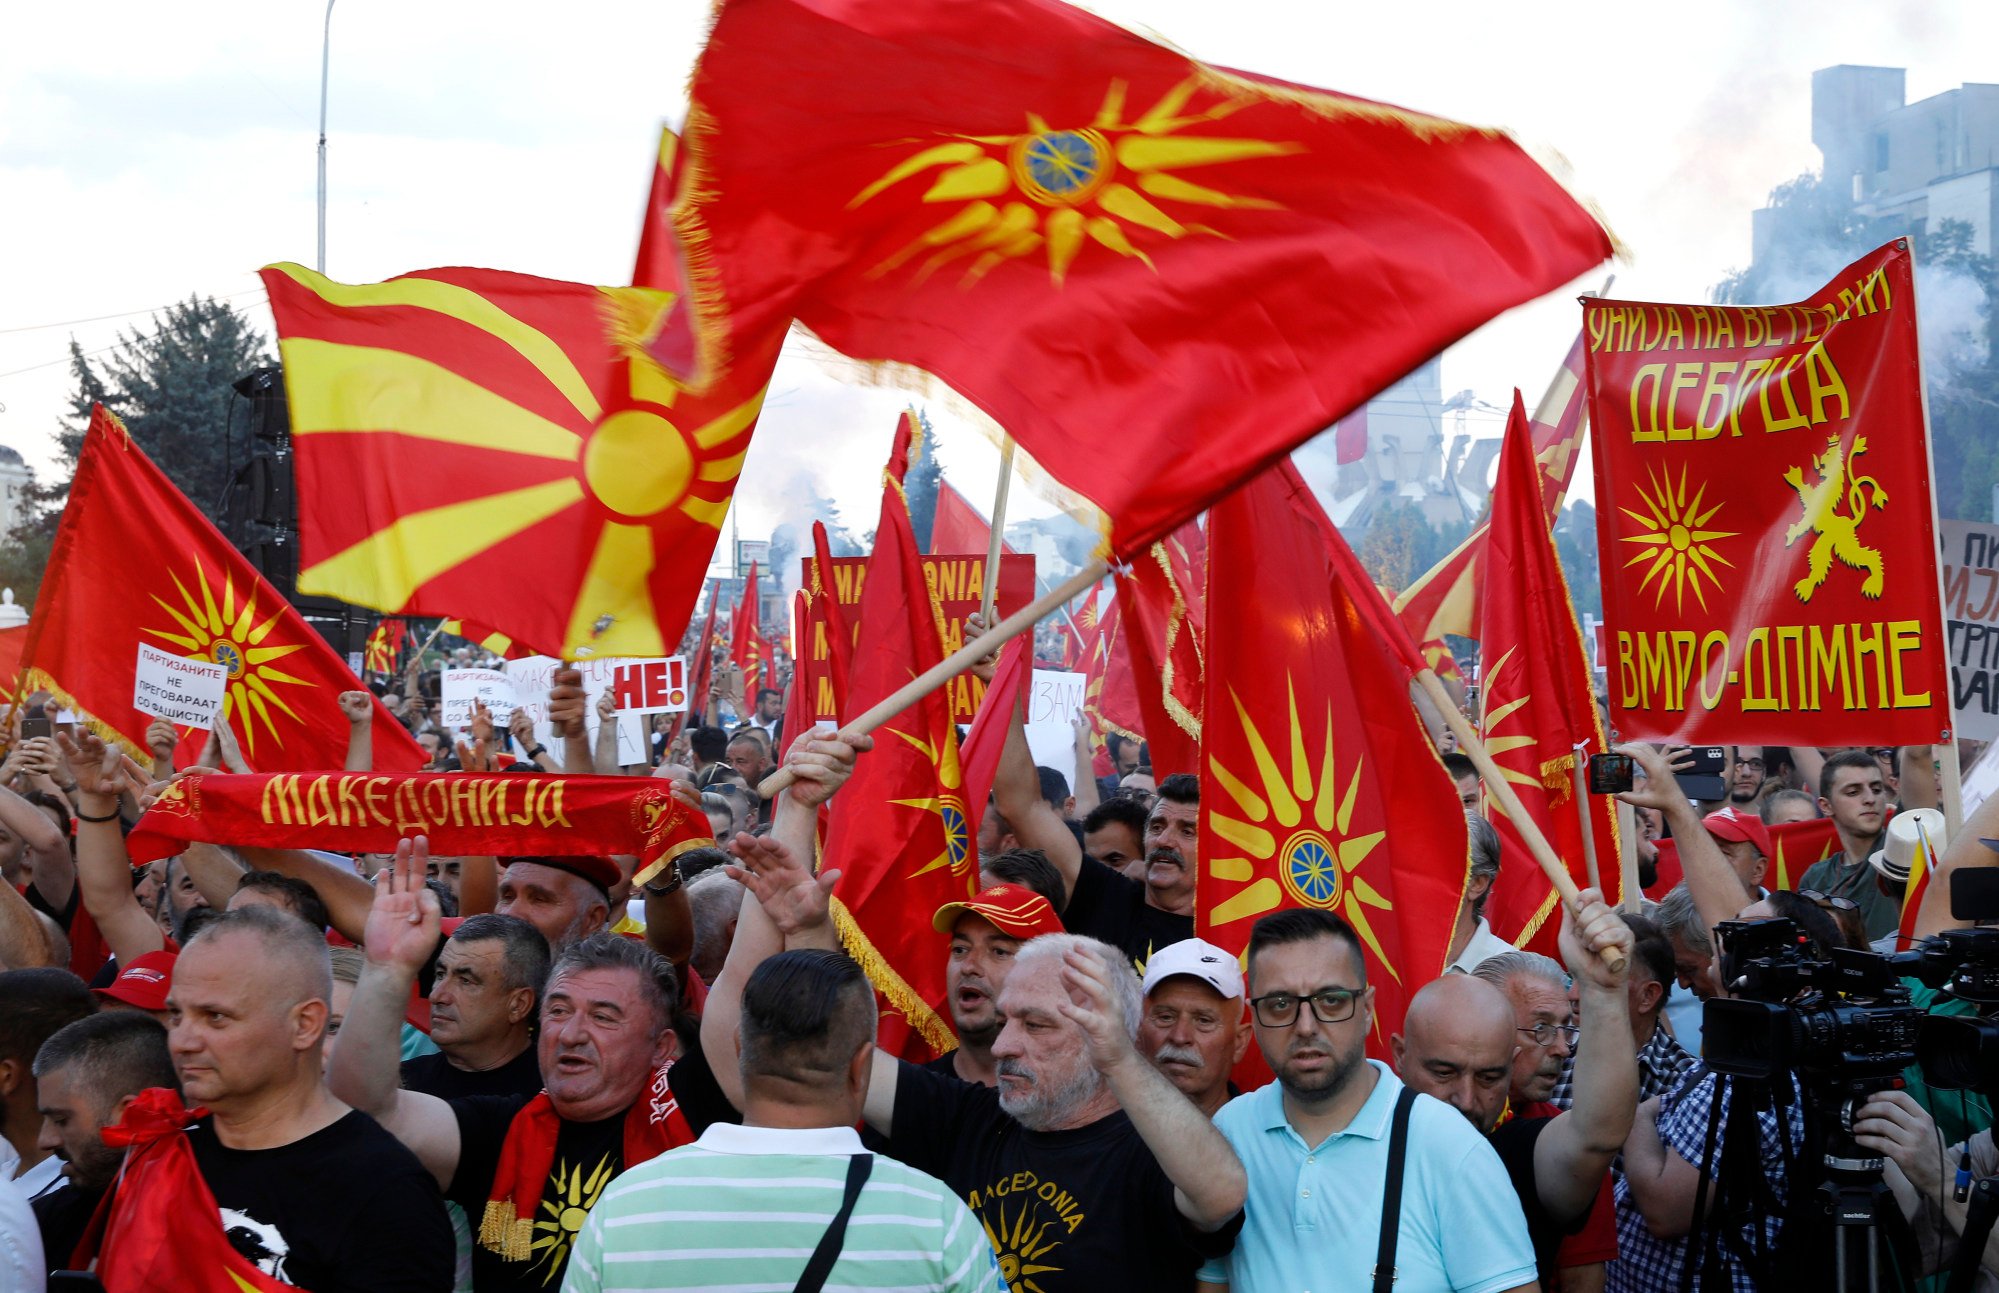 People wave the old and the current national flags of Macedonia as they attend a protest in front of the government building in Skopje, North Macedonia on Saturday. Photo: AP